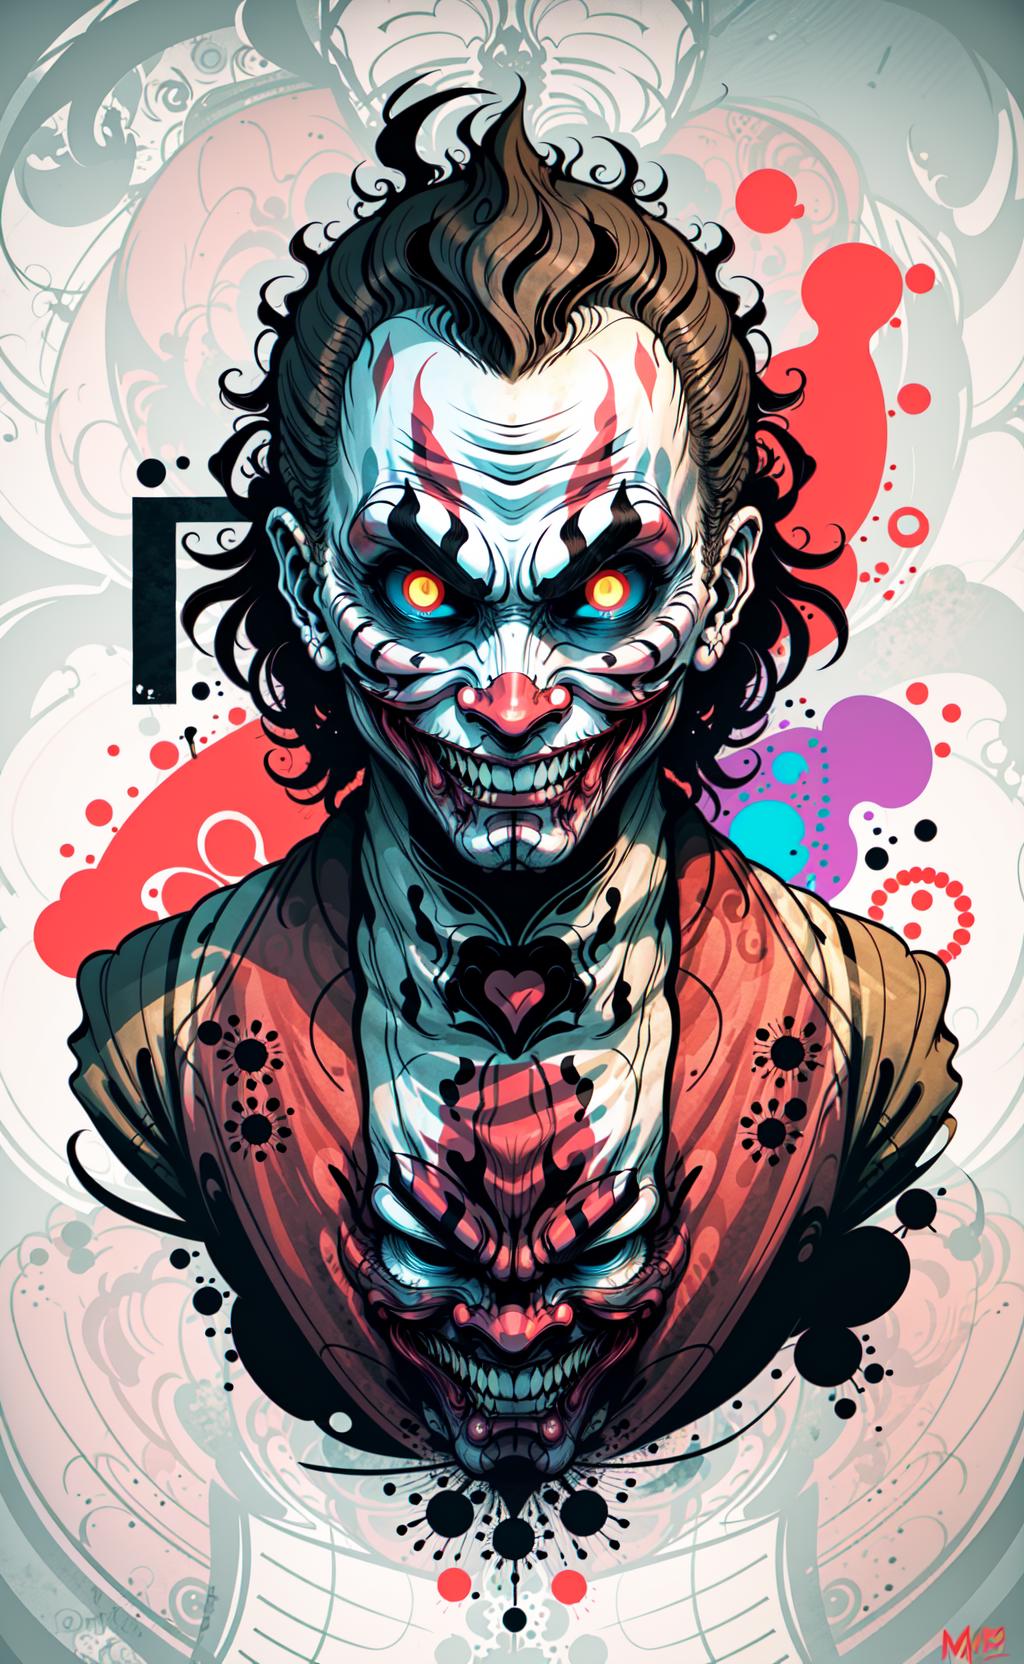 A demonic clown with a heart for a mouth and a face with multiple eyes is featured in this artwork. The clown is wearing a red and white outfit and appears to be sitting in a chair, surrounded by a colorful background. The surreal and eerie nature of the image makes it an intriguing piece of art.